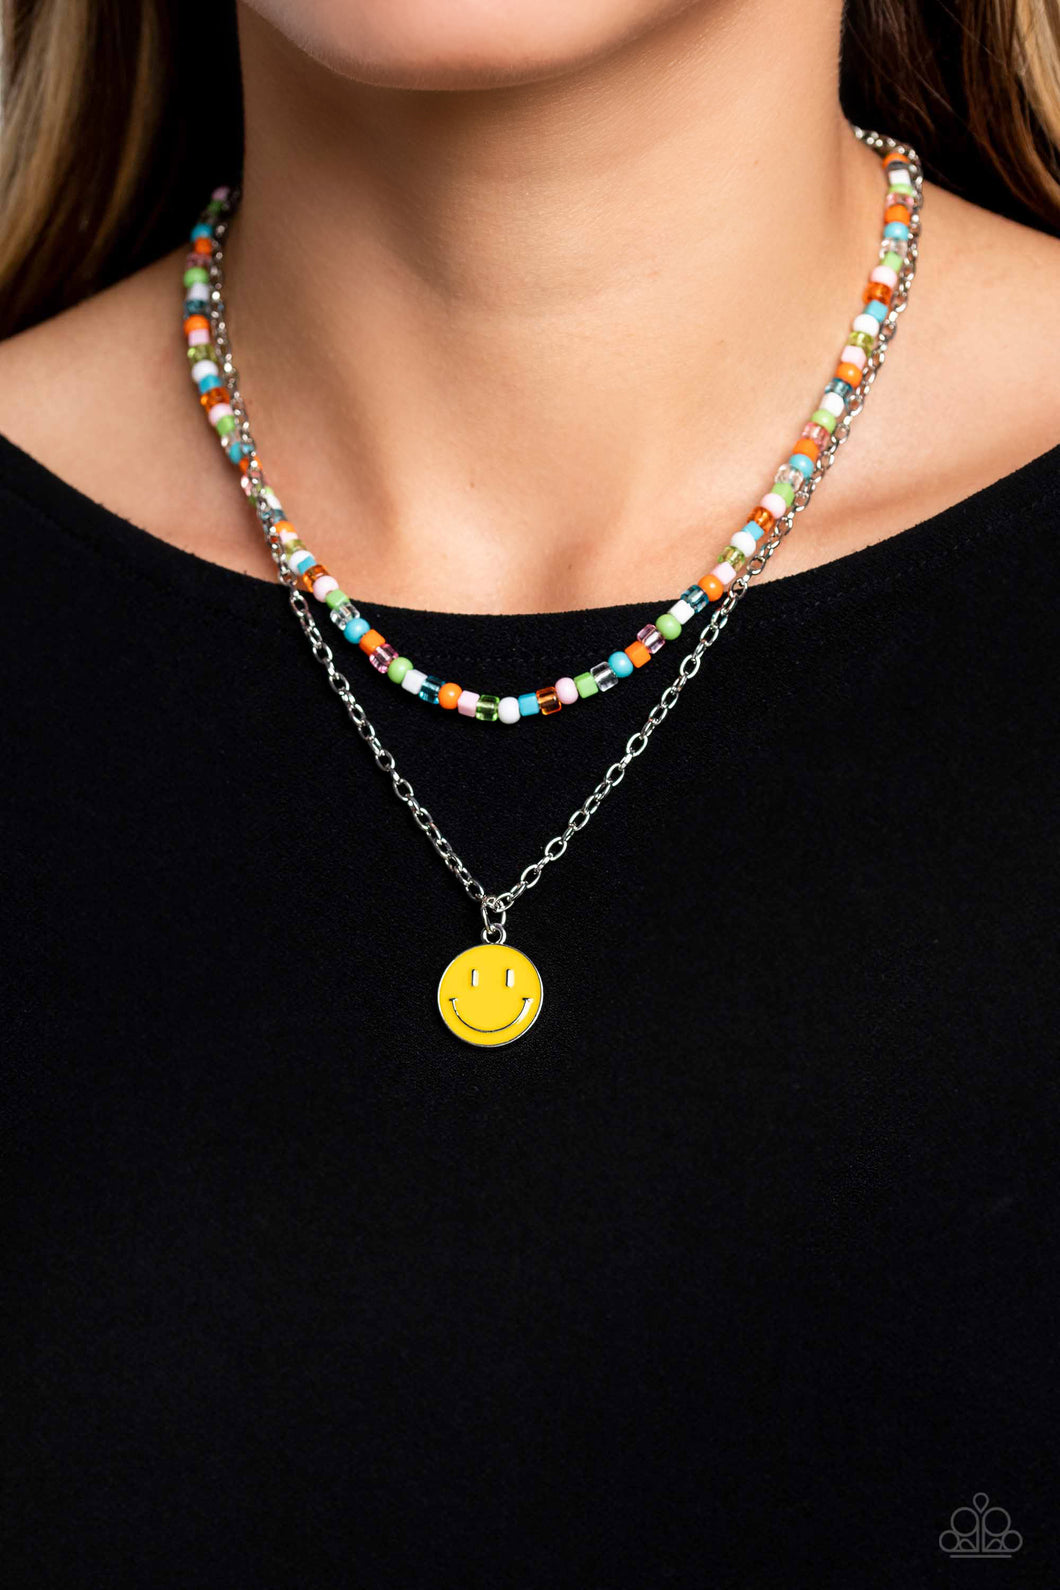 Gliding from a dainty, silver chain, a smiley face pendant stands out against a yellow backdrop. Completing the charismatic ensemble, a collection of seed beads in shades of baby pink, apple green, white, orange, and turquoise create bright pops of color around the neckline for a youthful finish. Features an adjustable clasp closure.  Sold as one individual necklace. Includes one pair of matching earrings.